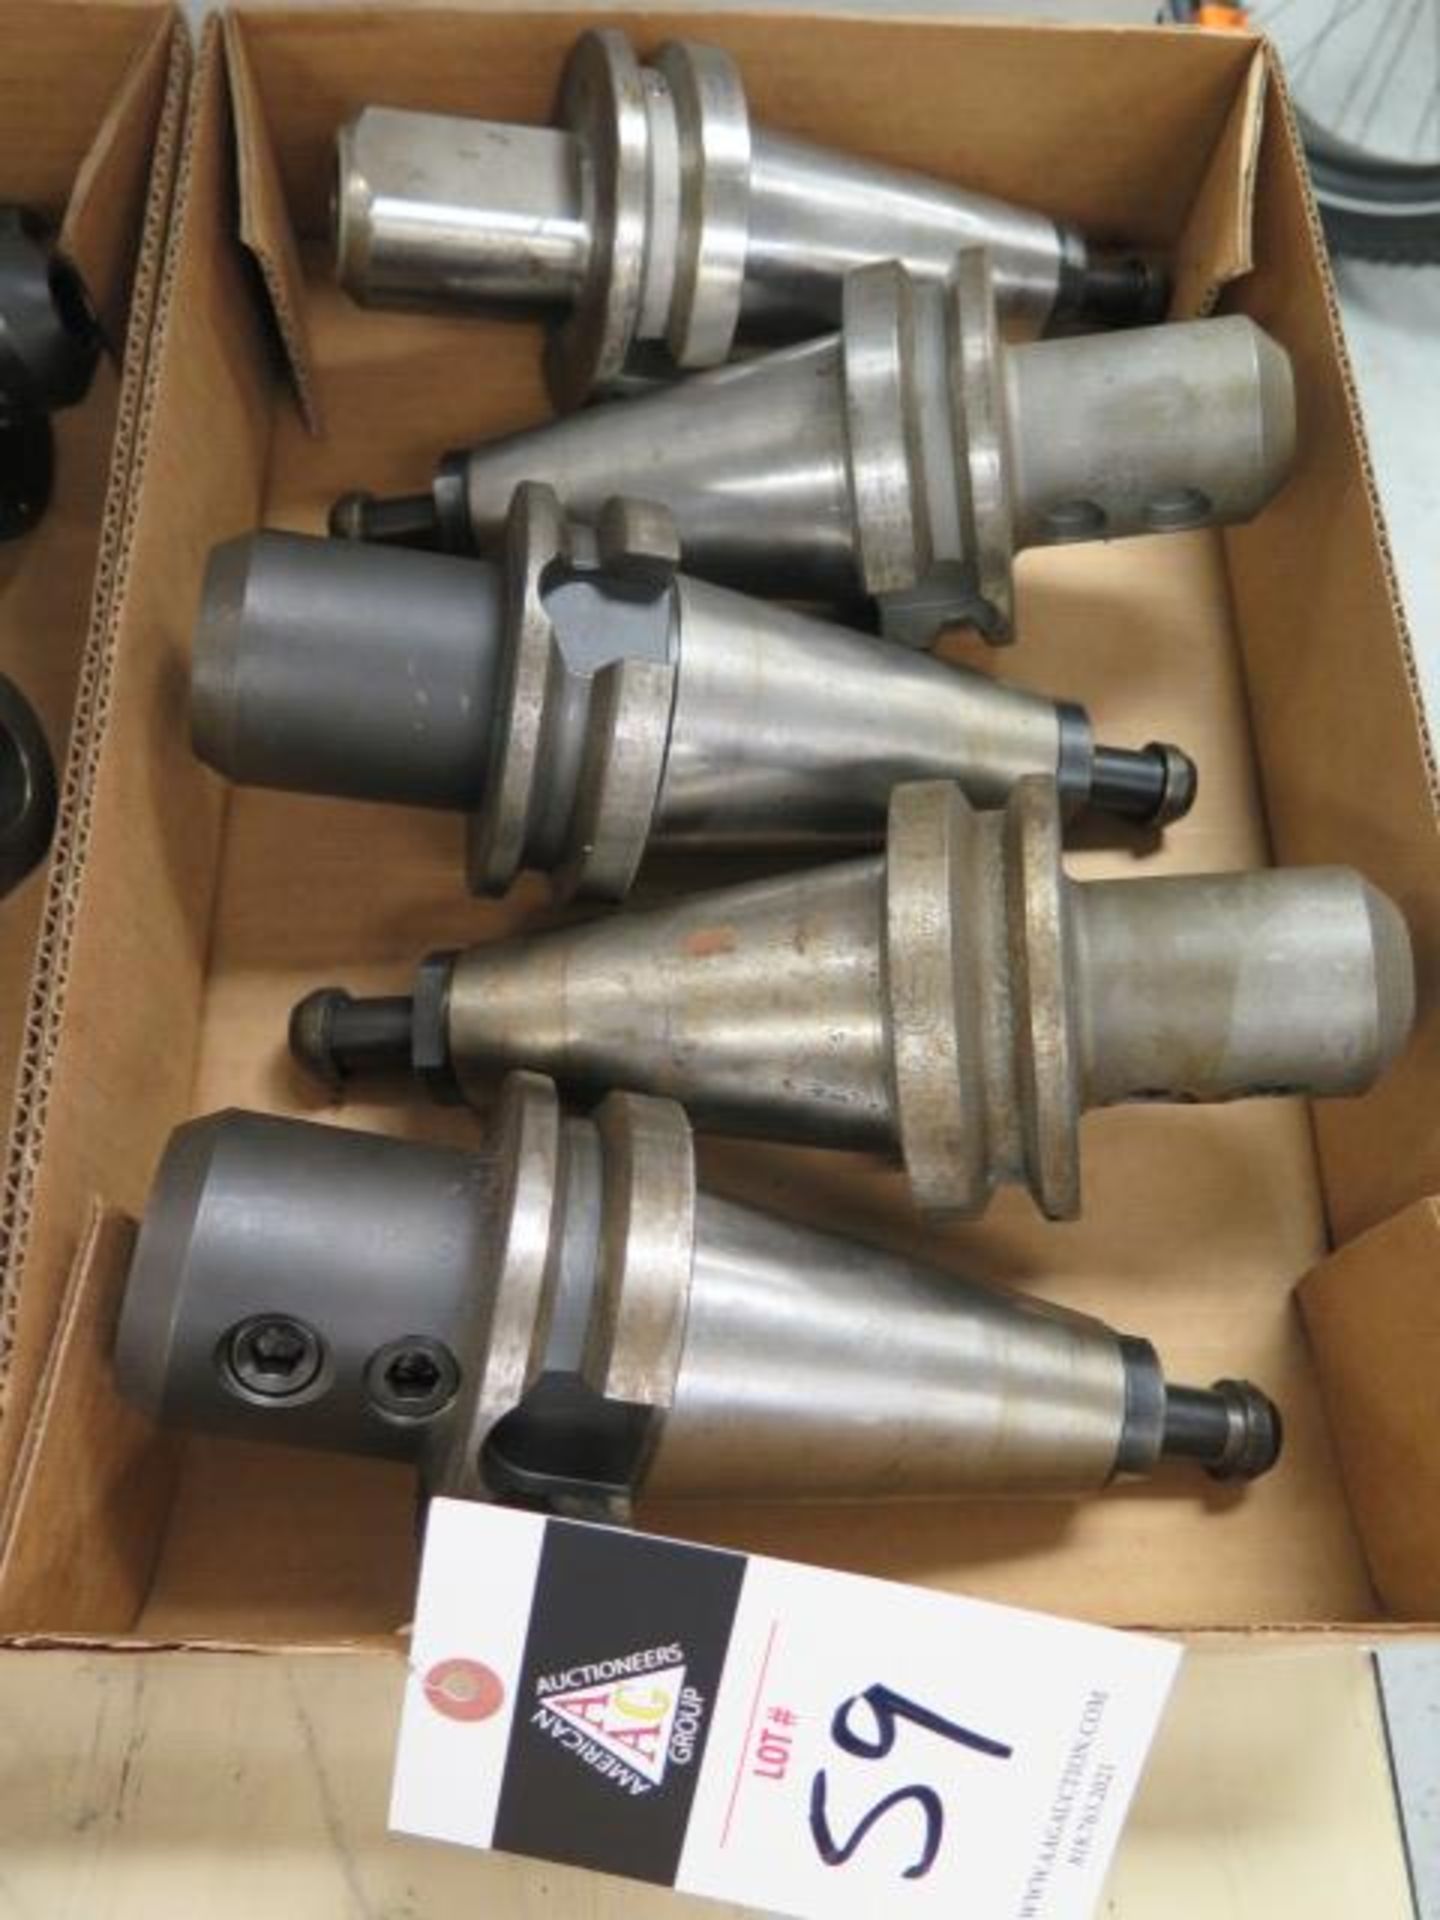 BT-50 Taper Tooling (5) (SOLD AS-IS - NO WARRANTY) (Located @ 2229 Ringwood Ave. San Jose)